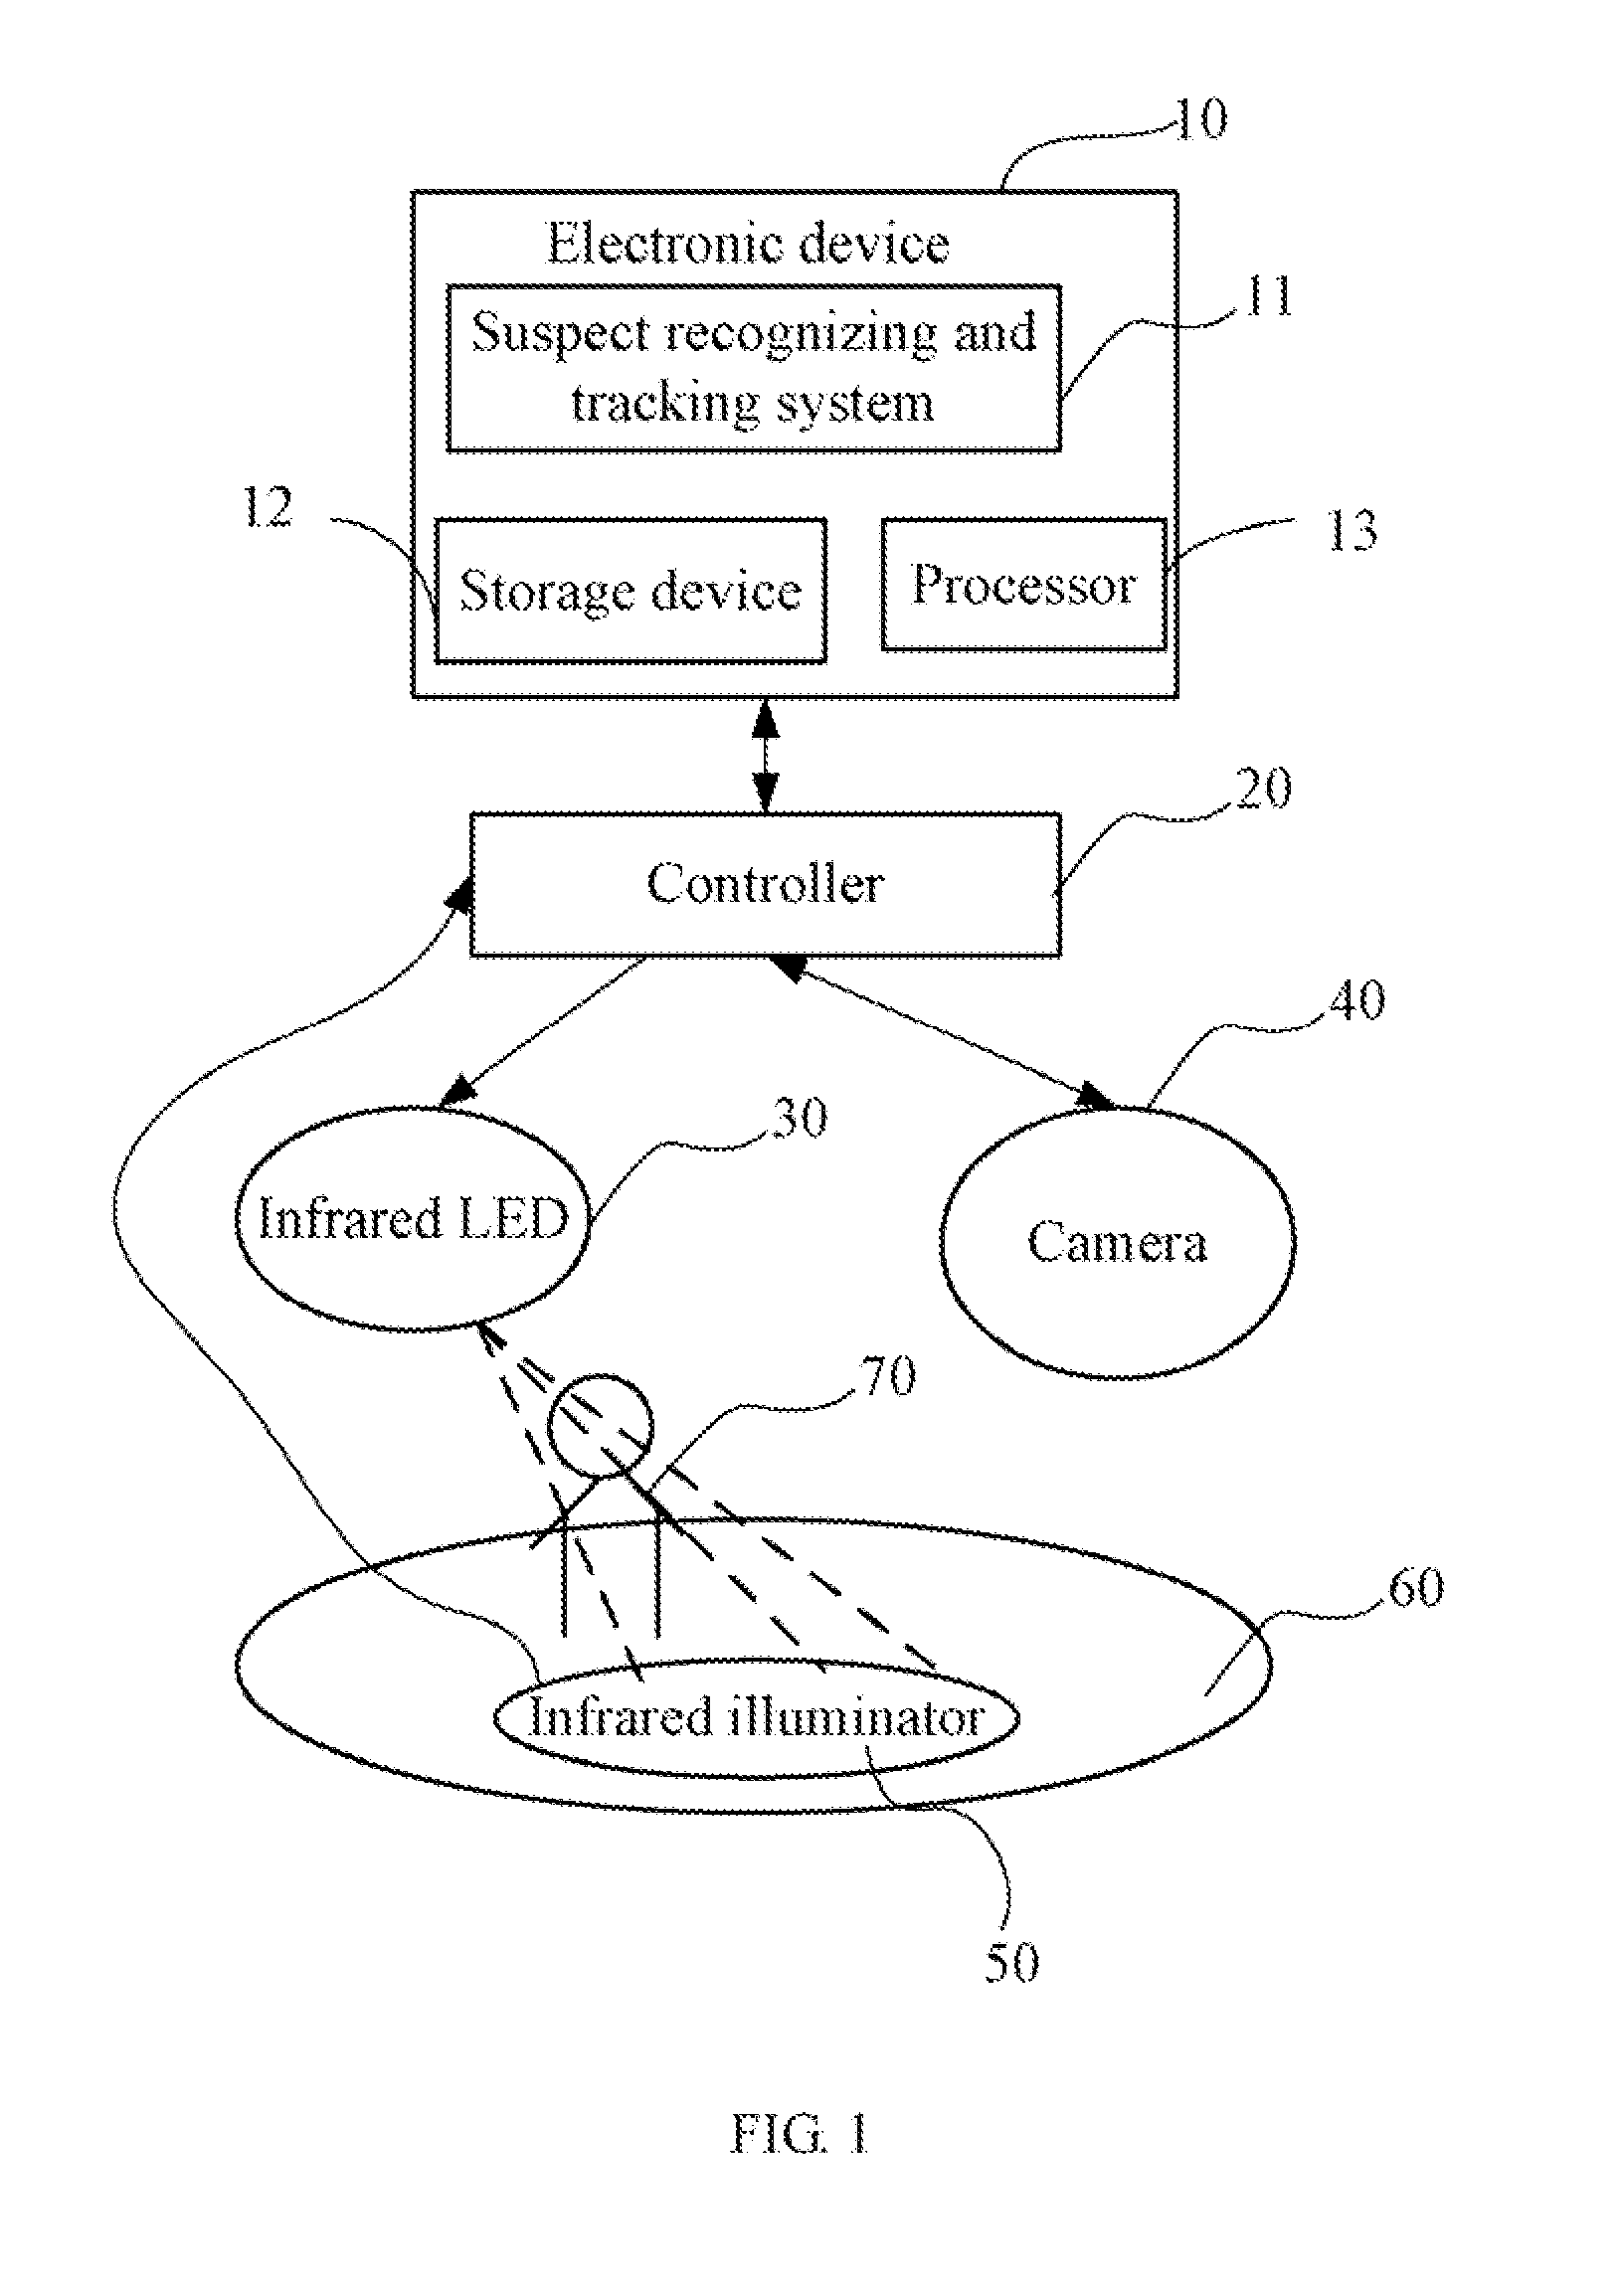 Electronic device and method for recognizing and tracking suspects